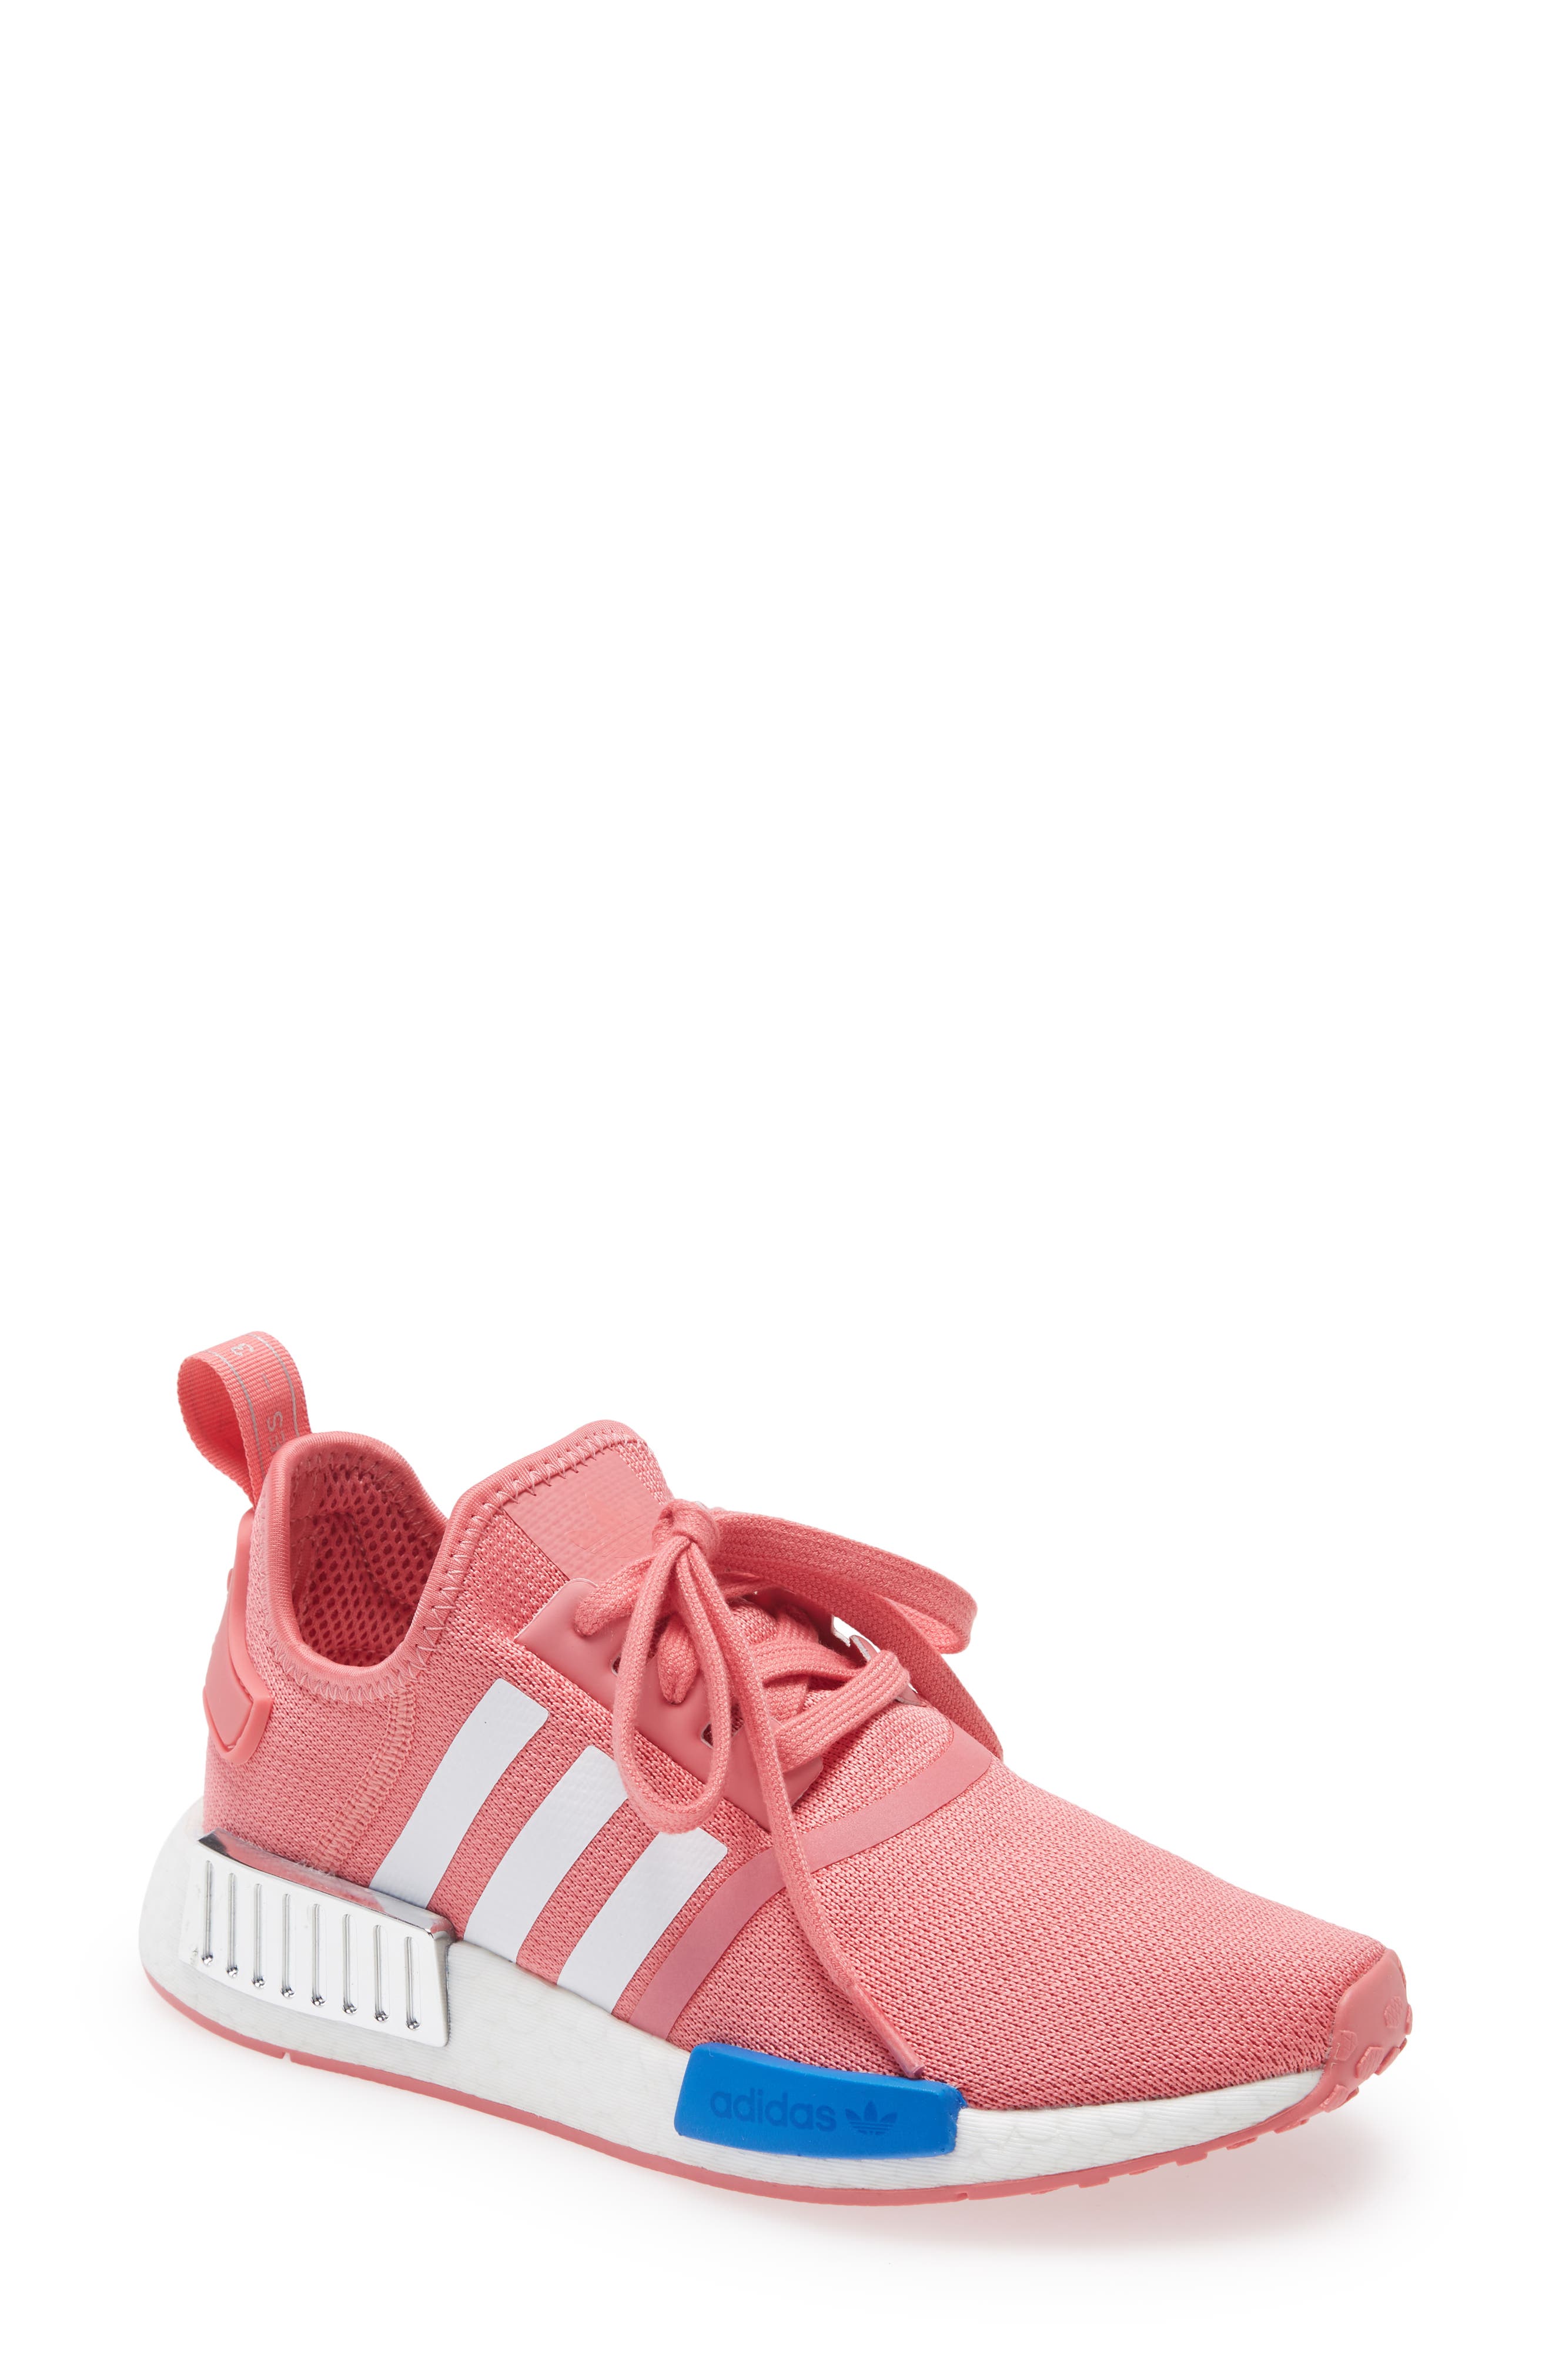 adidas nmd shoes pink